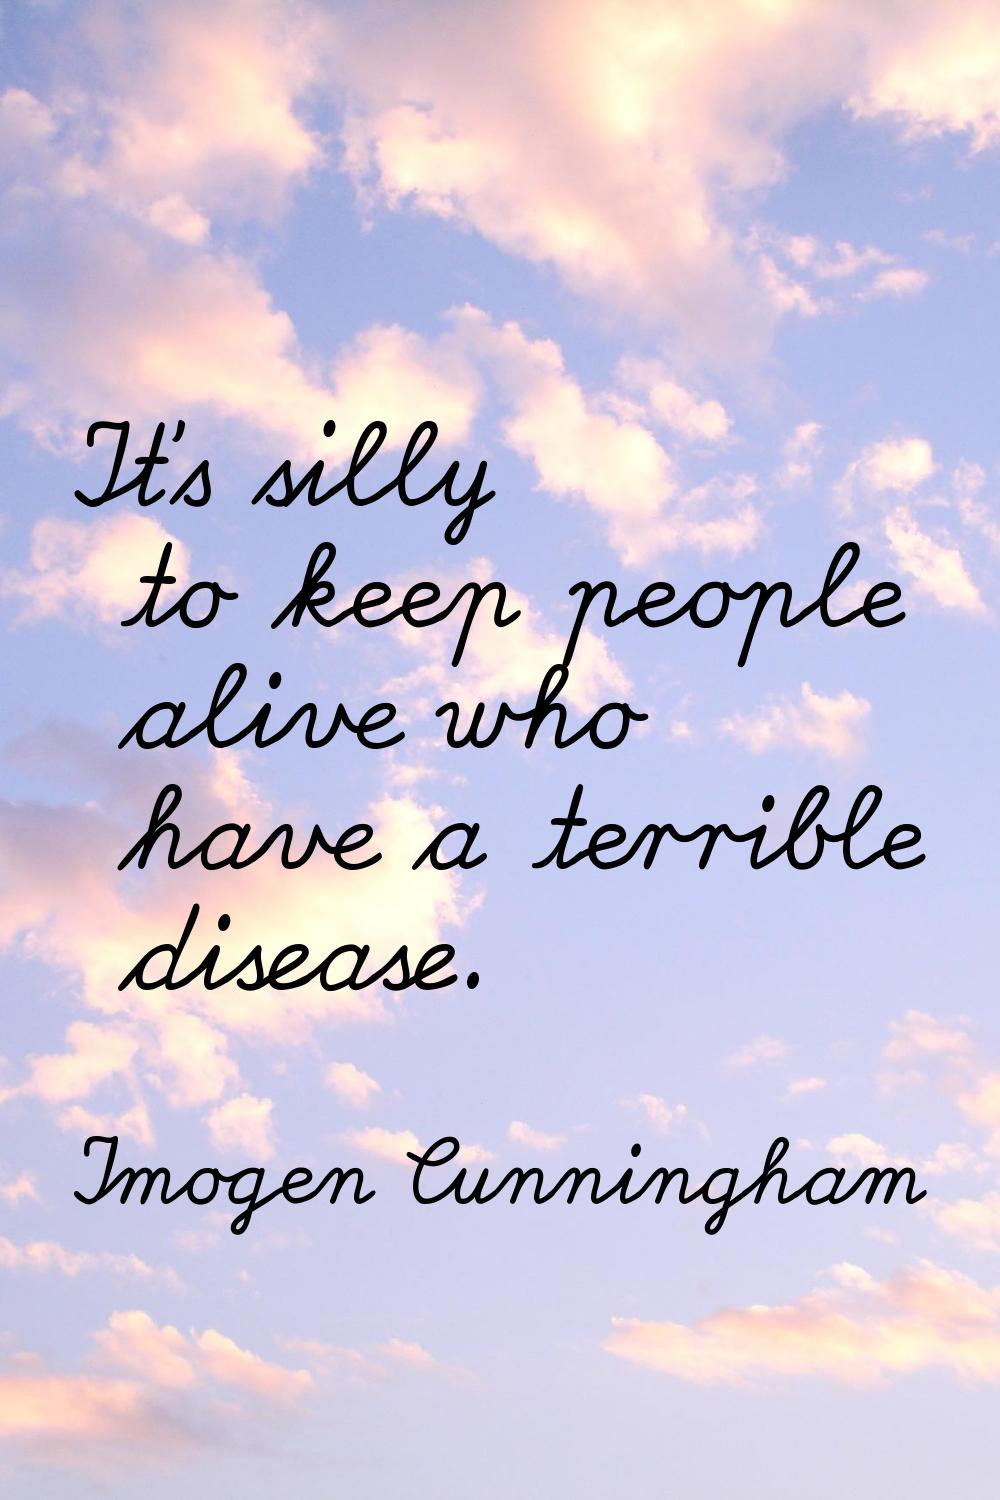 It's silly to keep people alive who have a terrible disease.